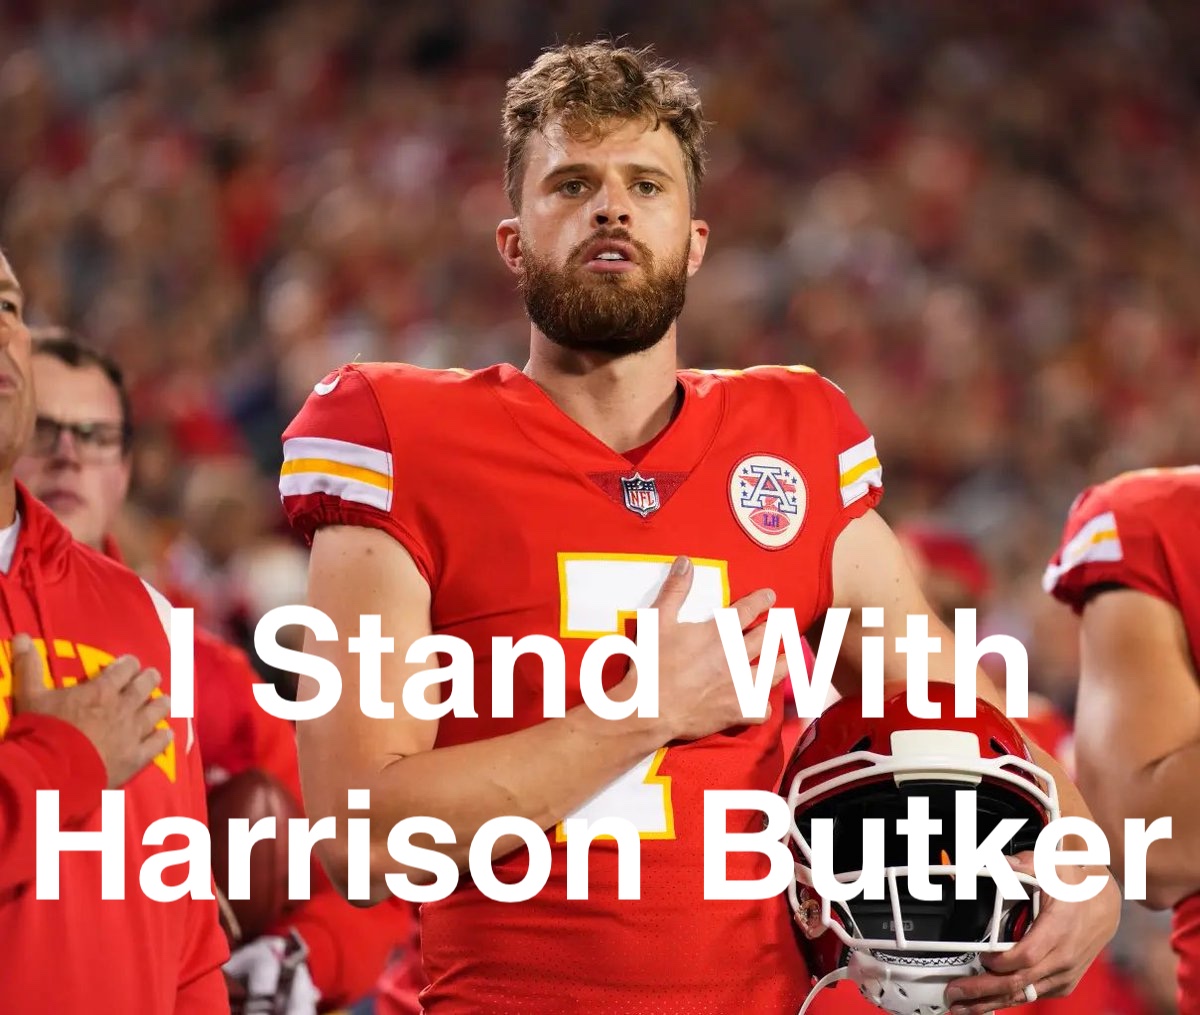 I stand with Harrison Butker. Do you?